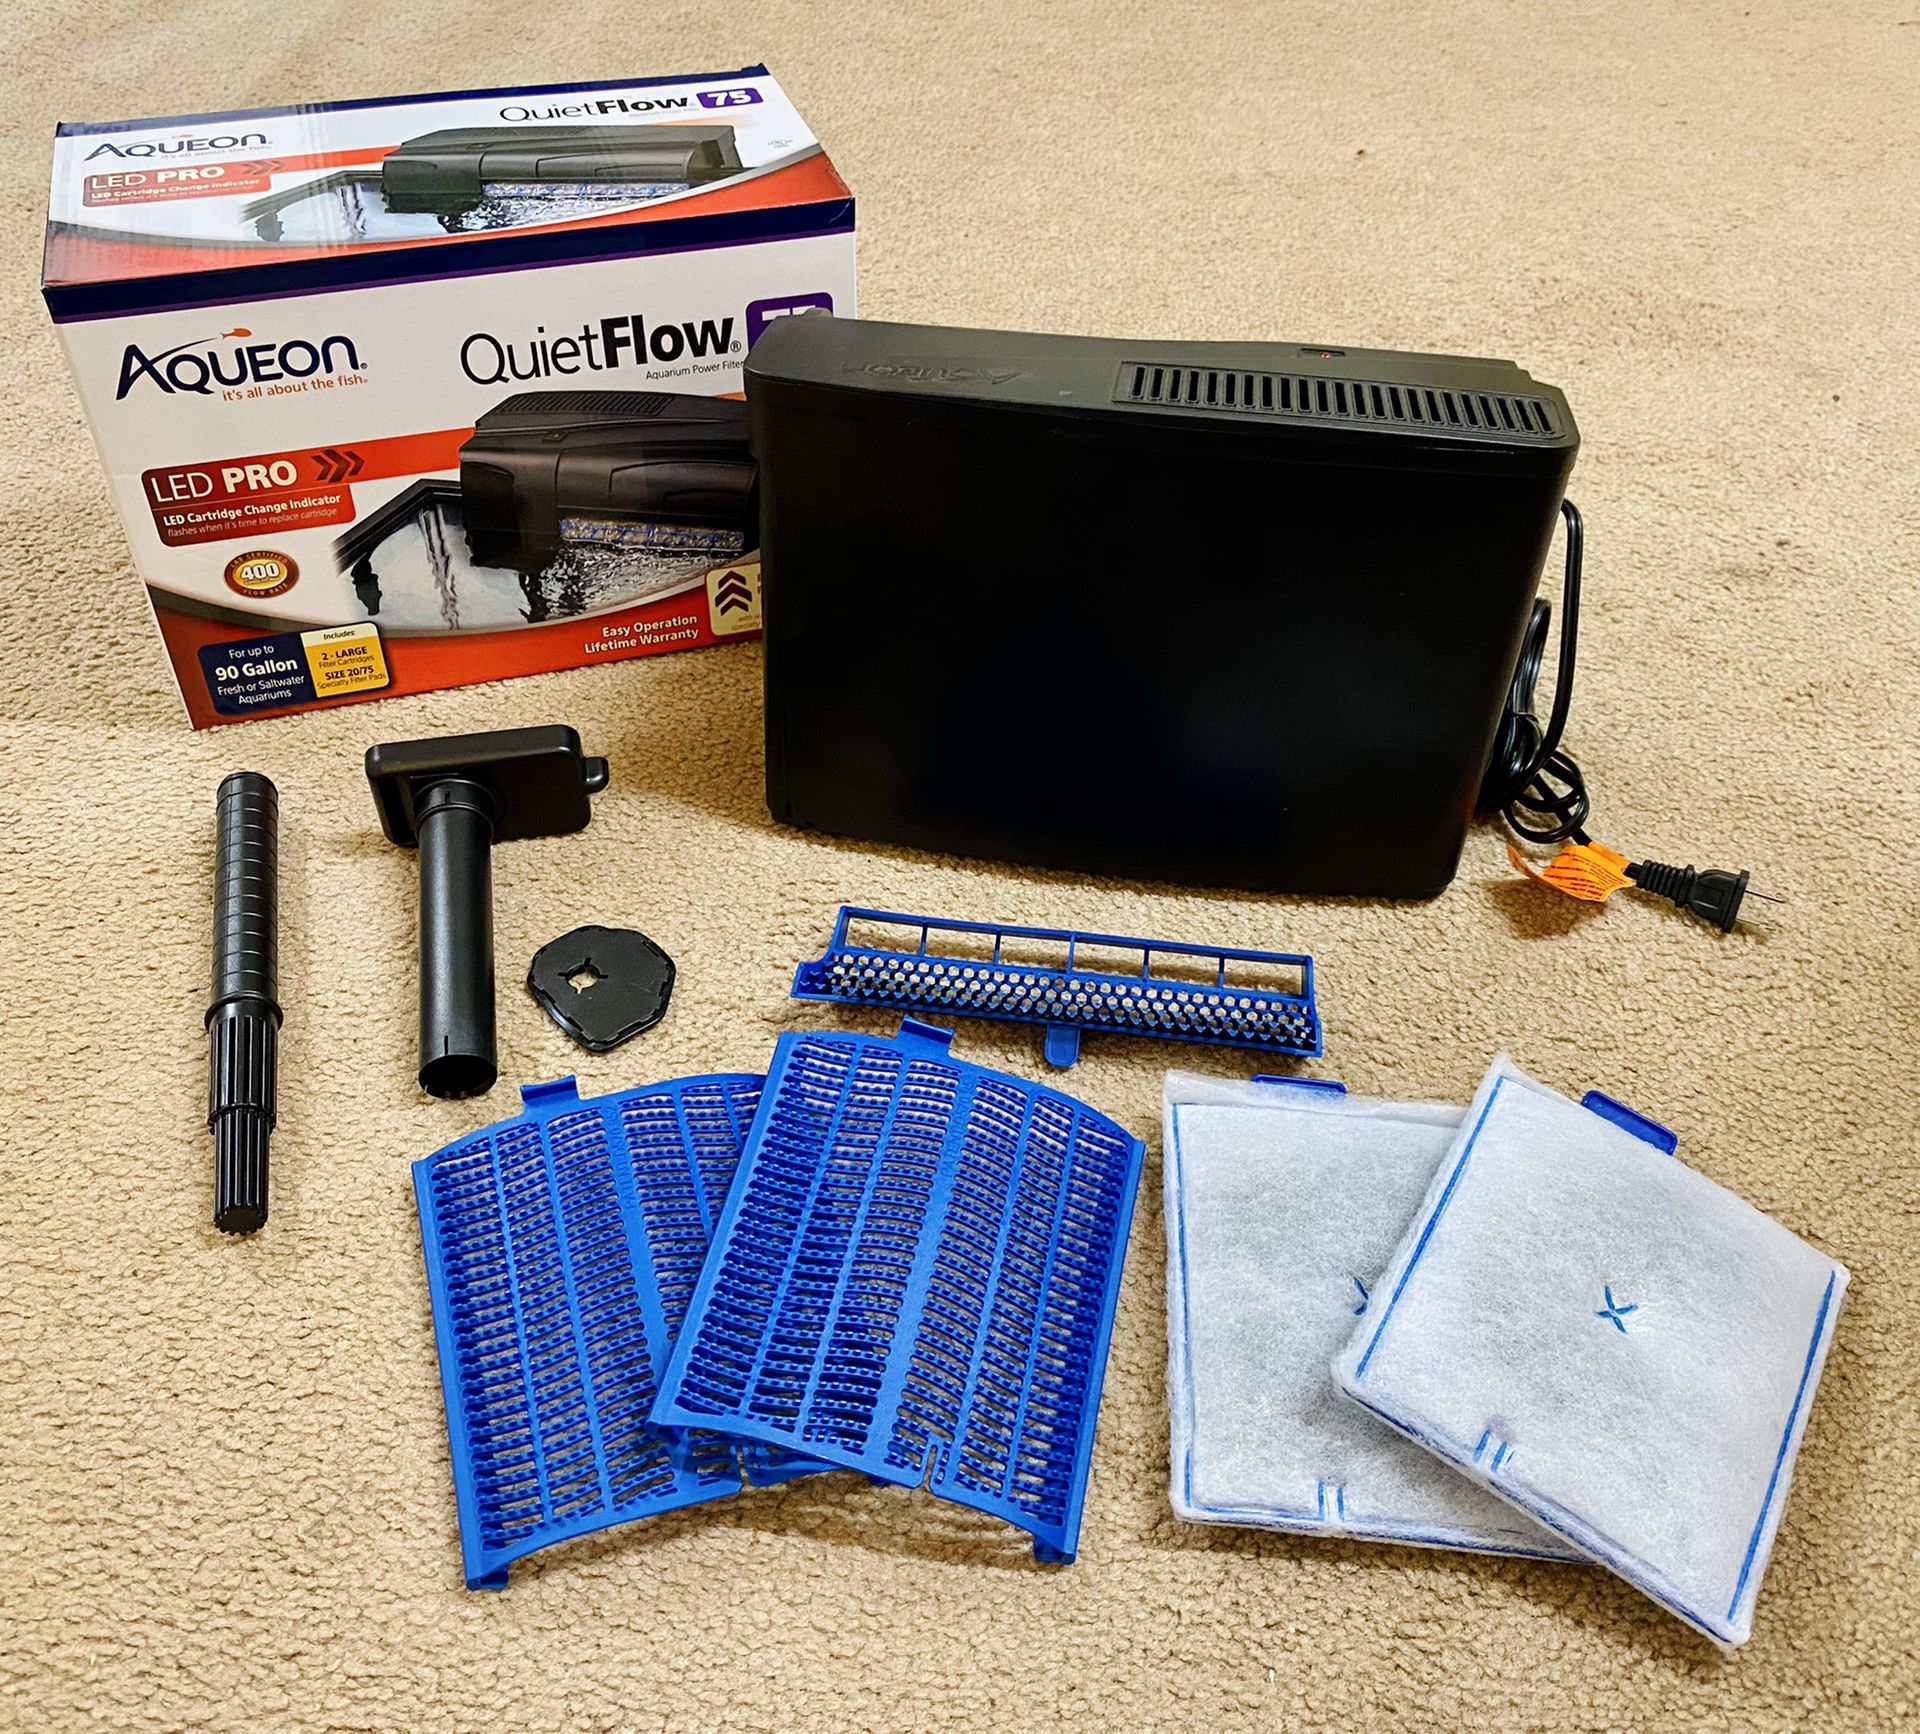 In Box Working Aqueon QuietFlow 75 LED Pro Cartridge Change Indicator 90 Gallon HOB Water Self-Priming, Very Quiet Filter & 2 New Filters Included Fo